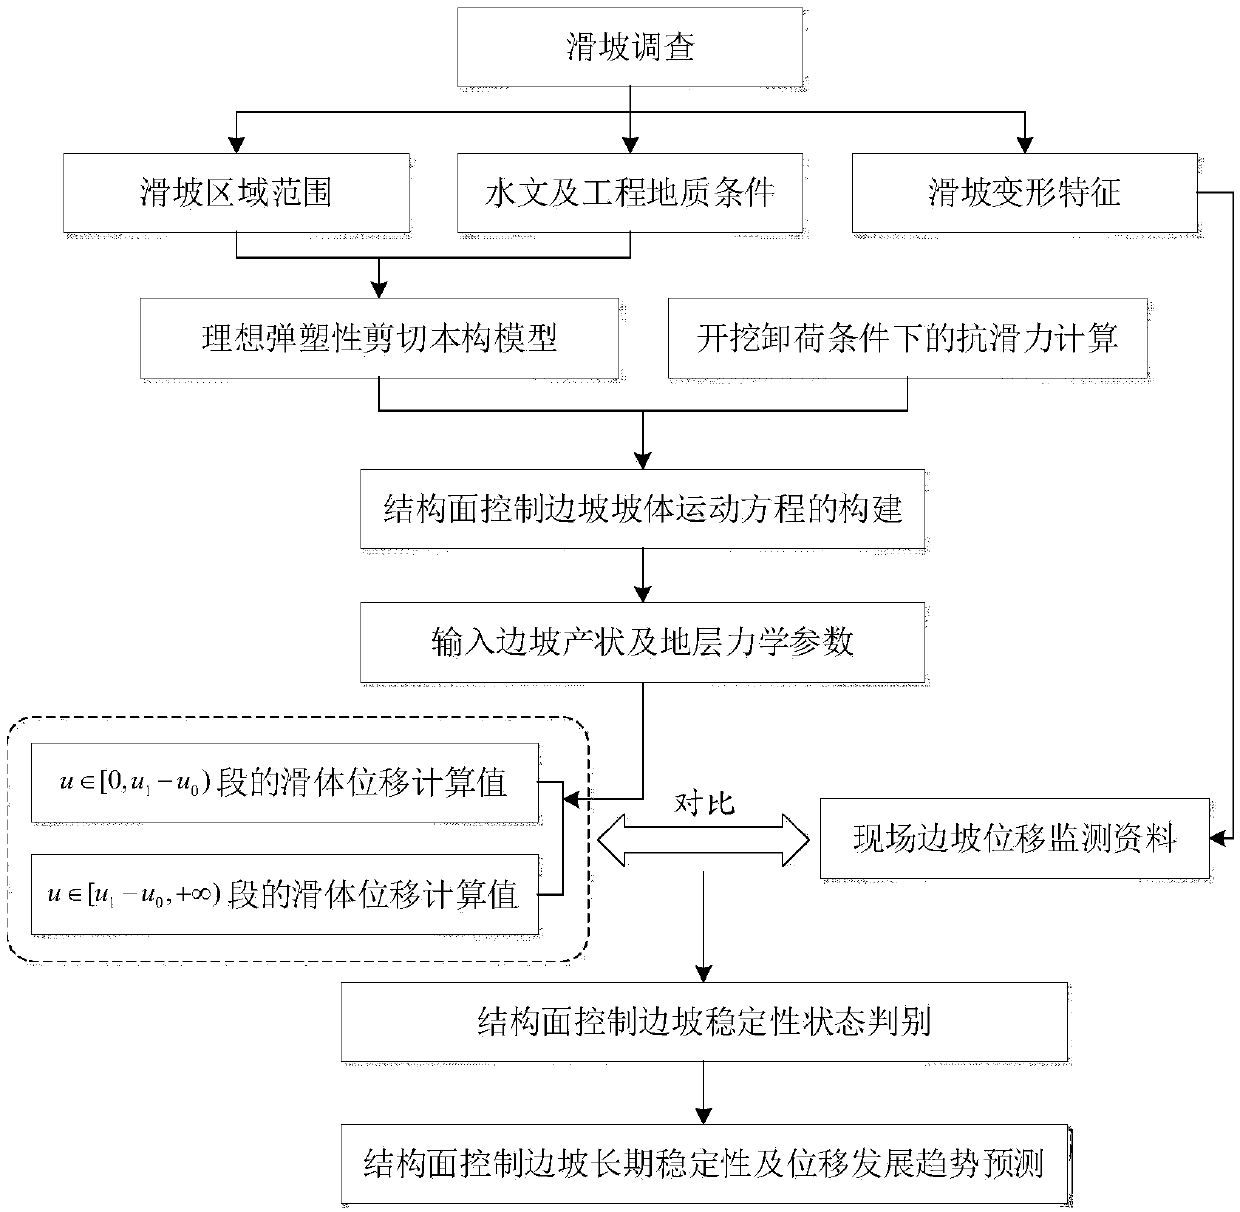 Structural surface control slope stability evaluation method based on excavation deformation